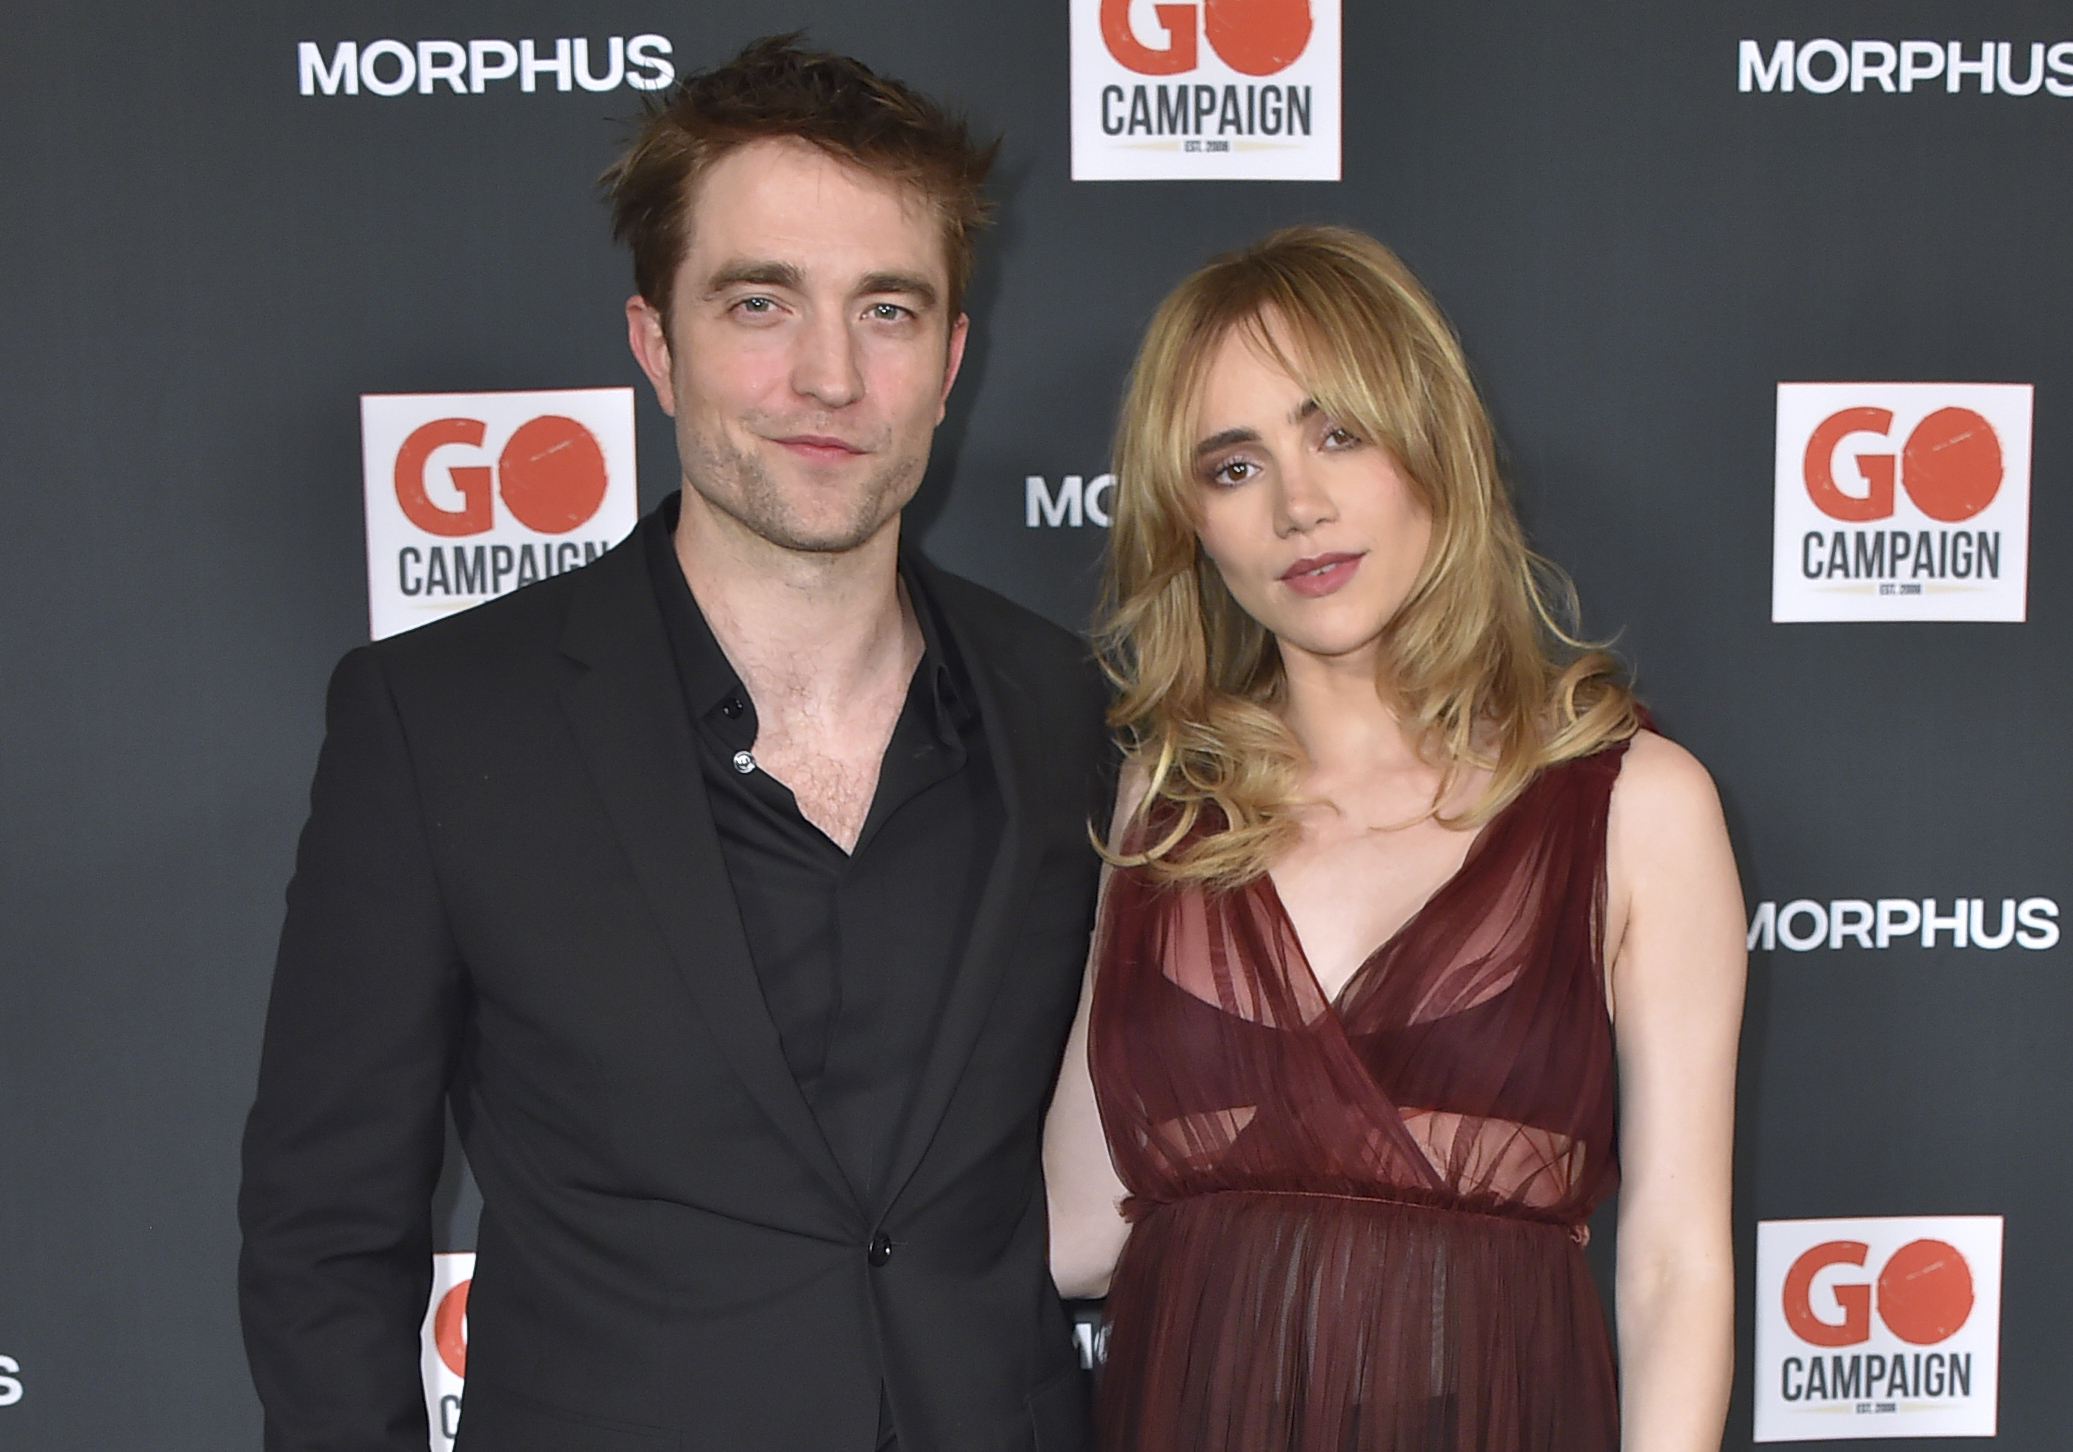 Robert Pattinson, left, and Suki Waterhouse arrive at the GO Campaign's annual GO Gala on Saturday, Oct. 21, 2023, in Los Angeles. (Photo by Jordan Strauss/Invision/AP)